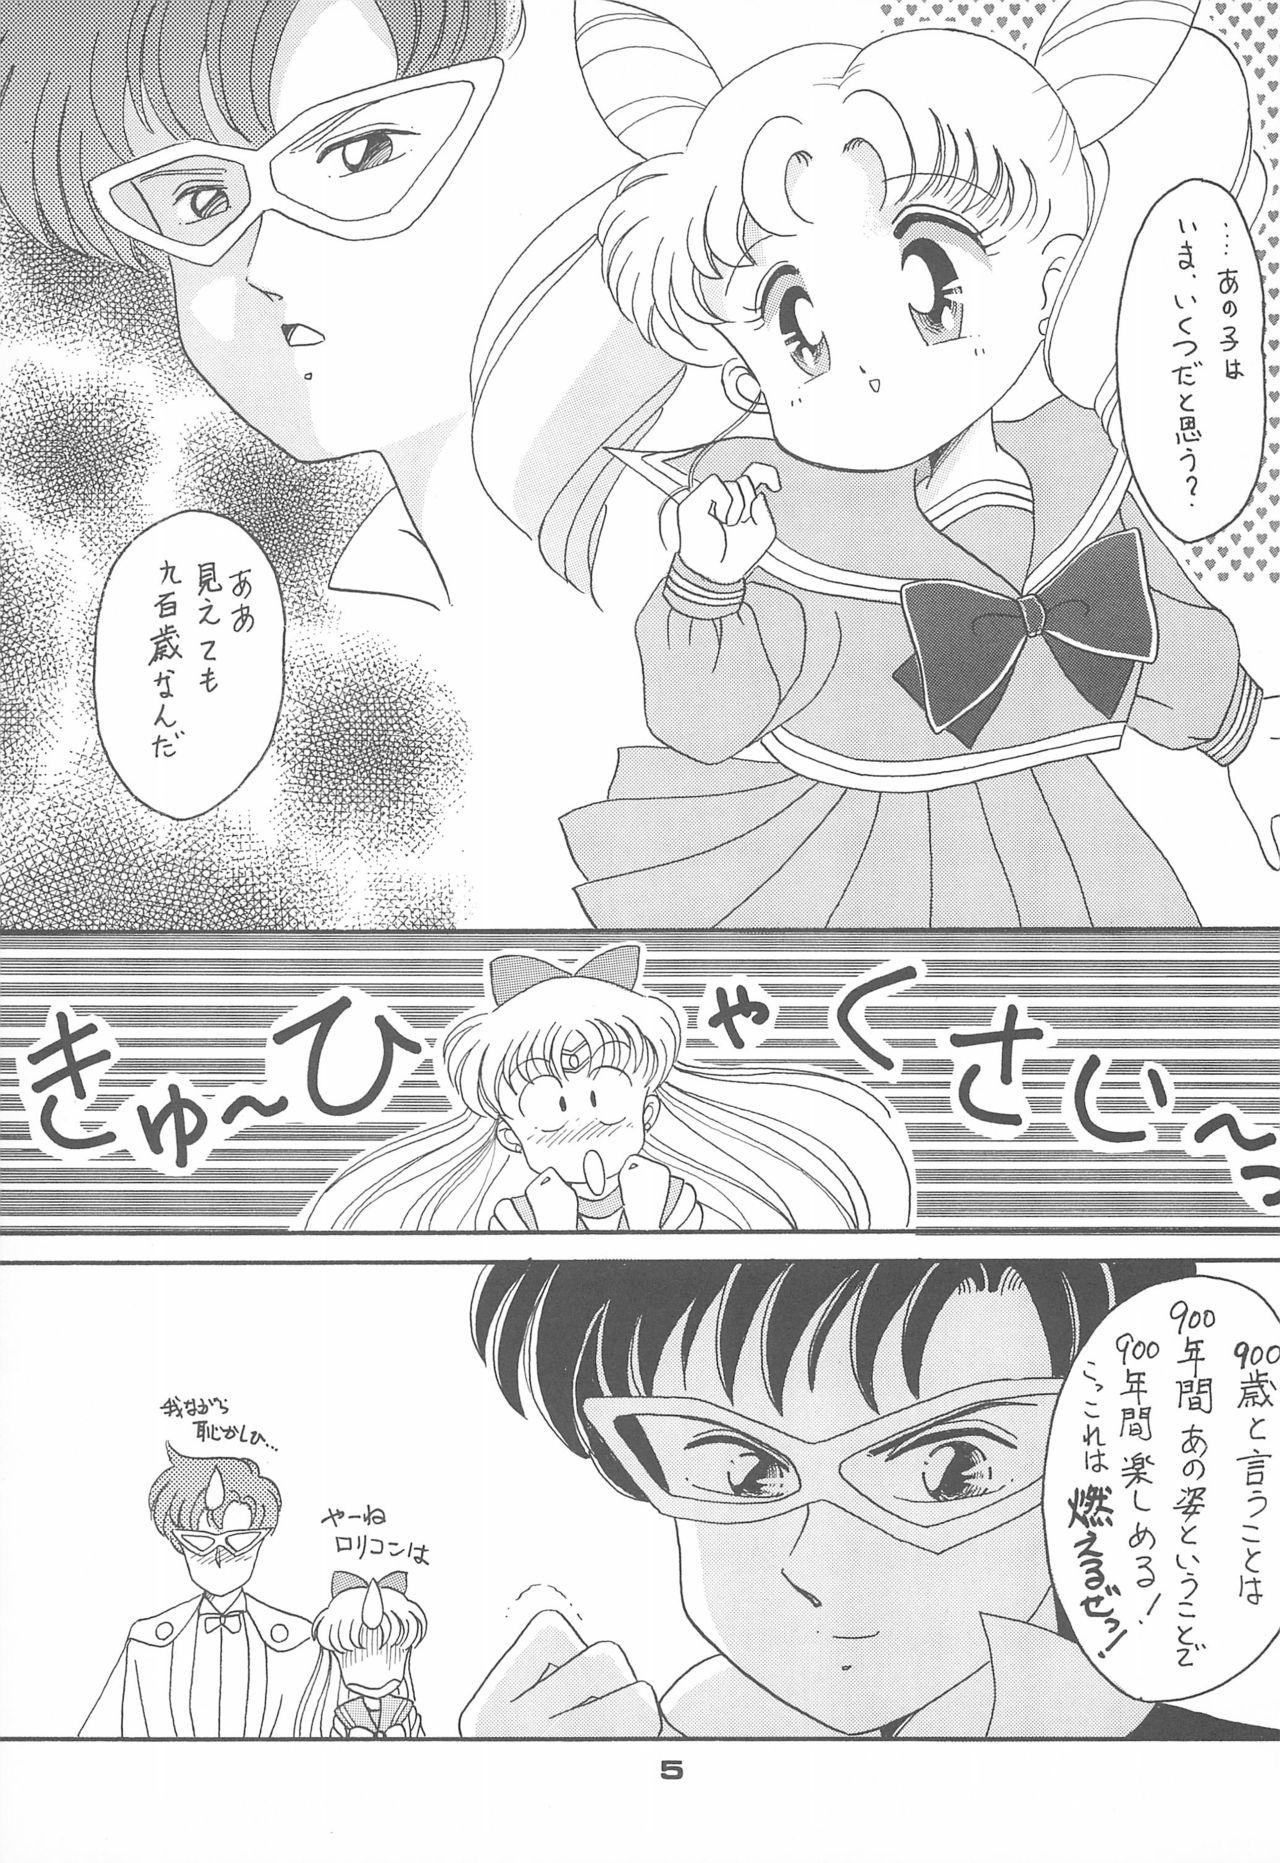 Pussyfucking Ponponpon 4 - Sailor moon Skirt - Page 7